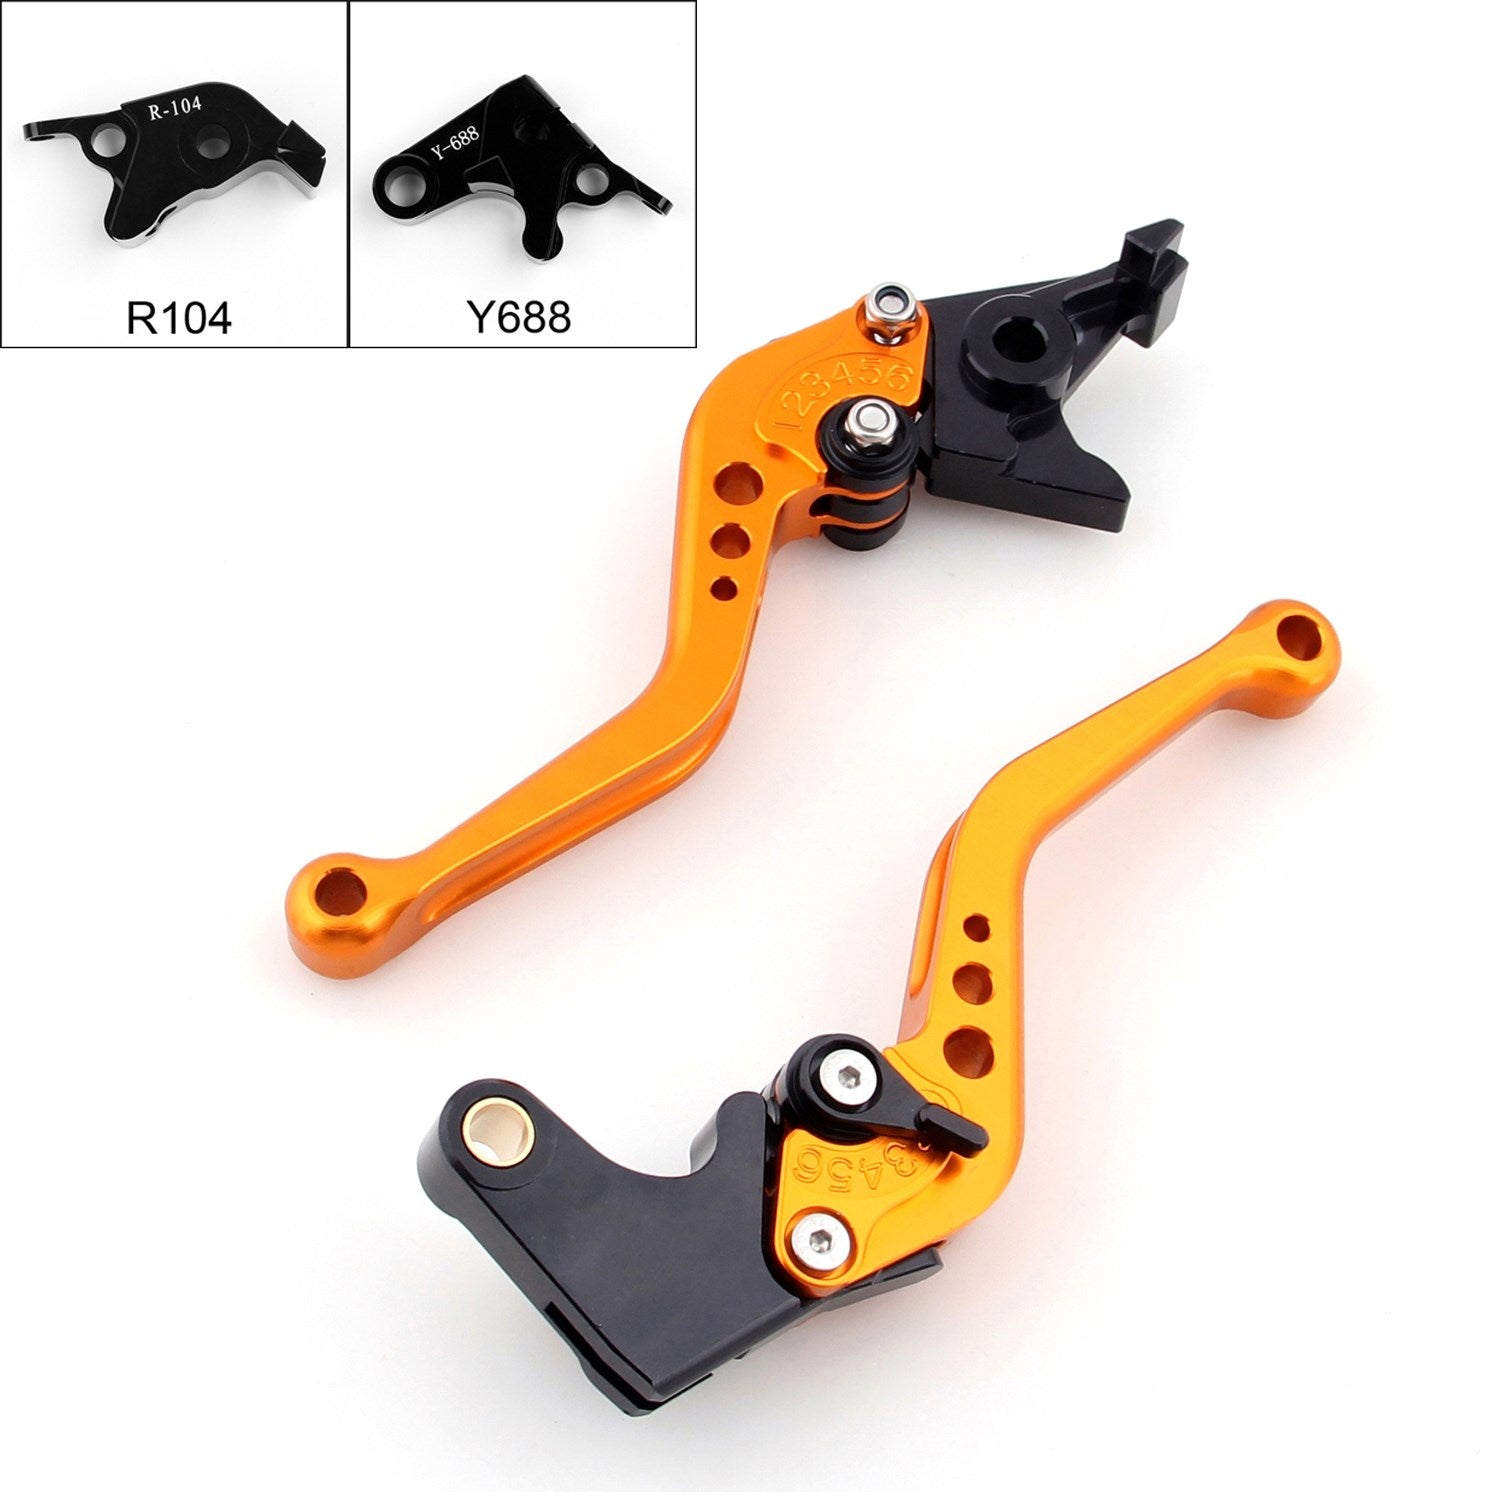 Short Brake Clutch Levers For Yamaha YZF R6 05-14 YZF R1 04-08 R6S